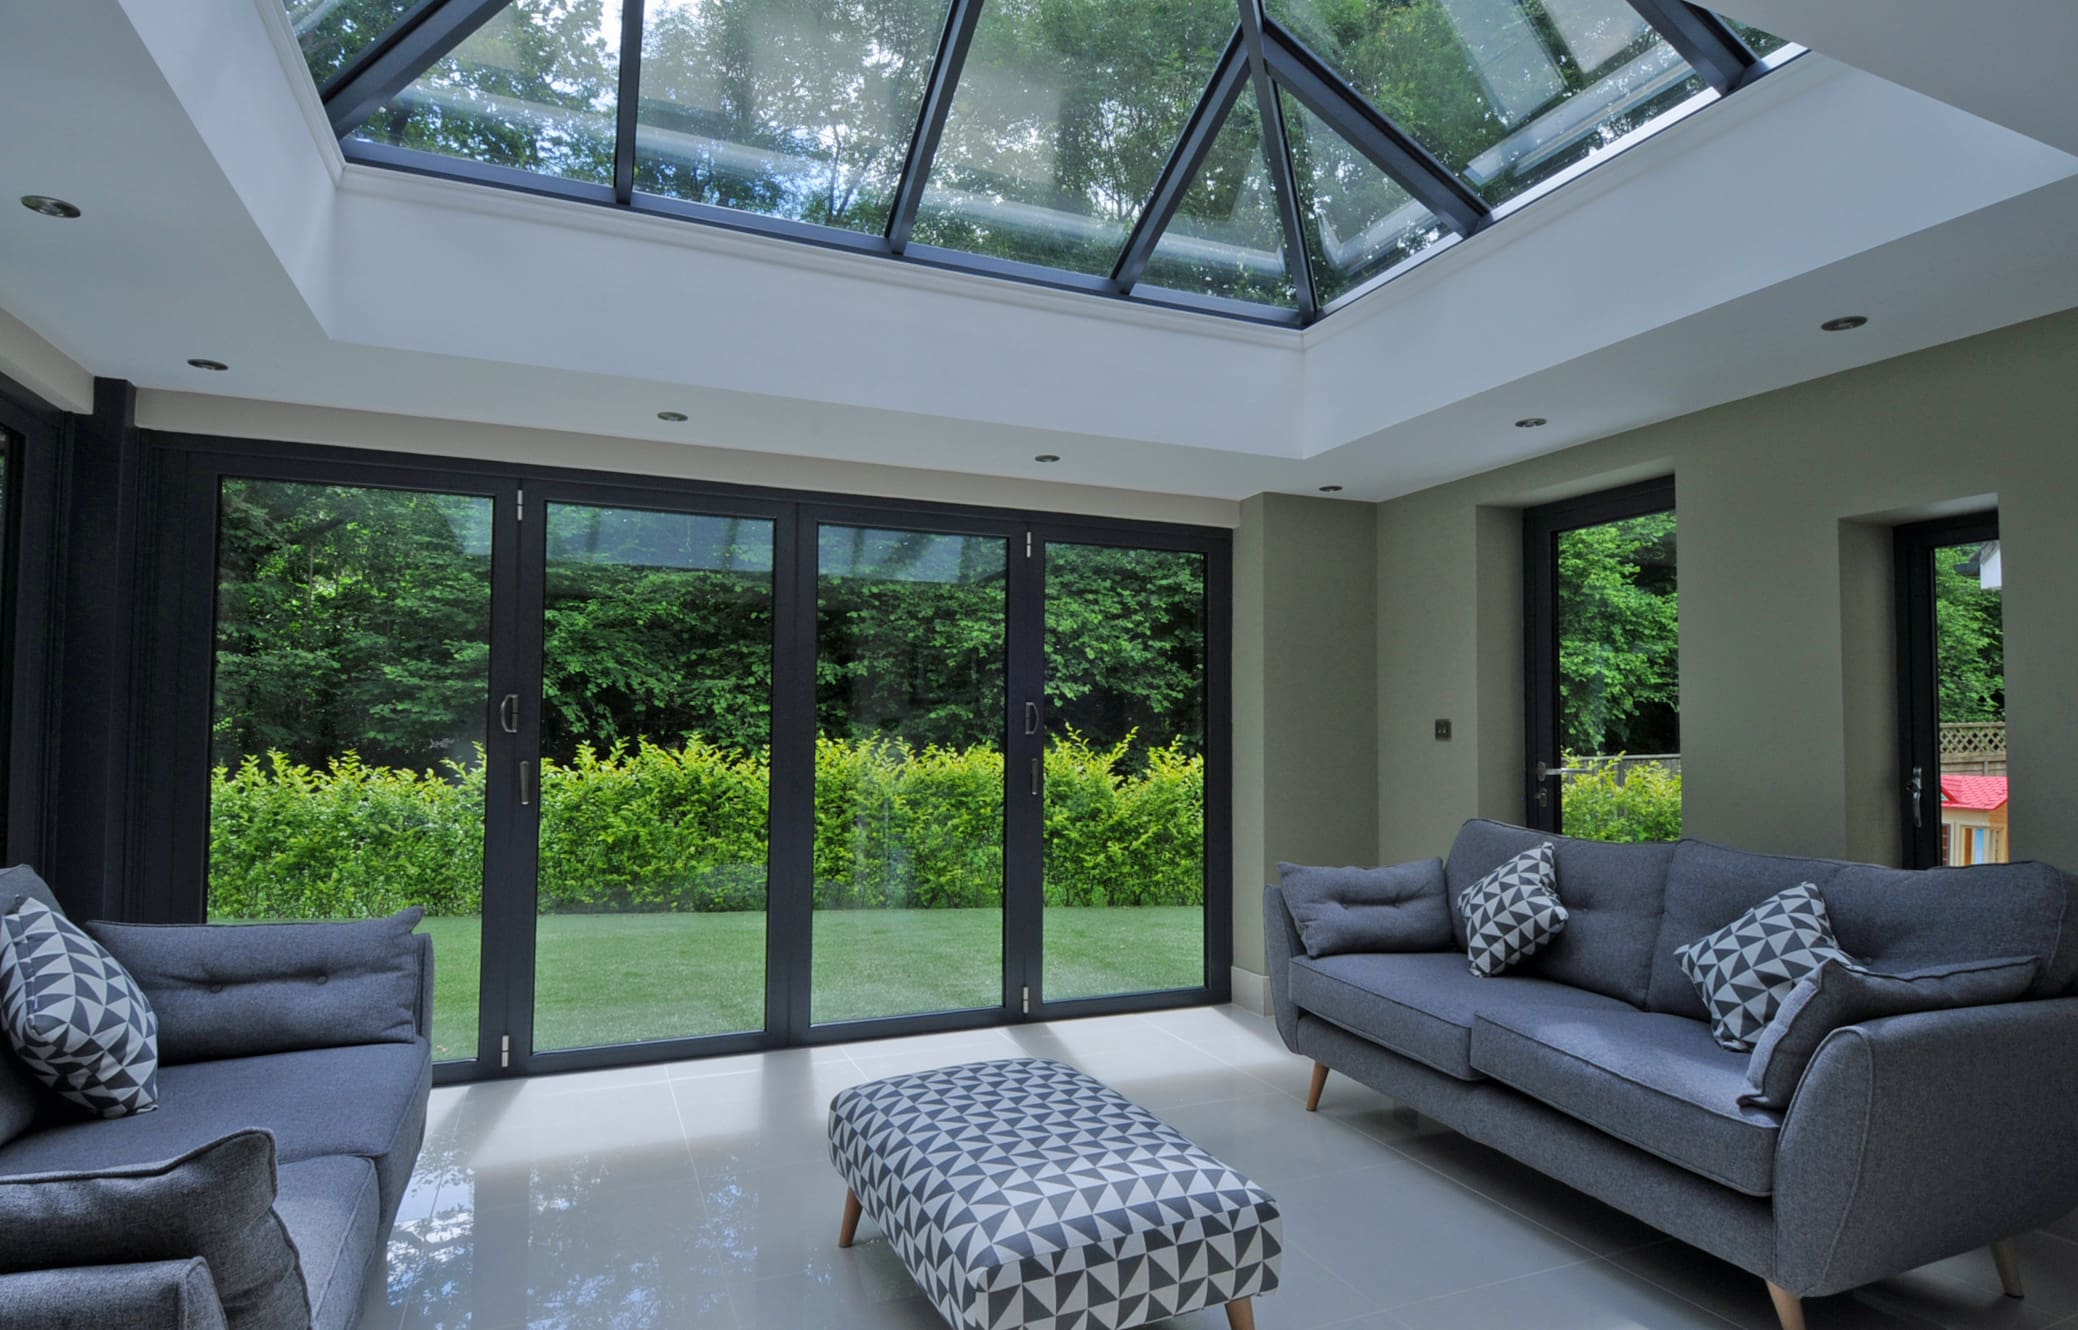 Contemporary living room interior with roof lantern and bifolding doors.